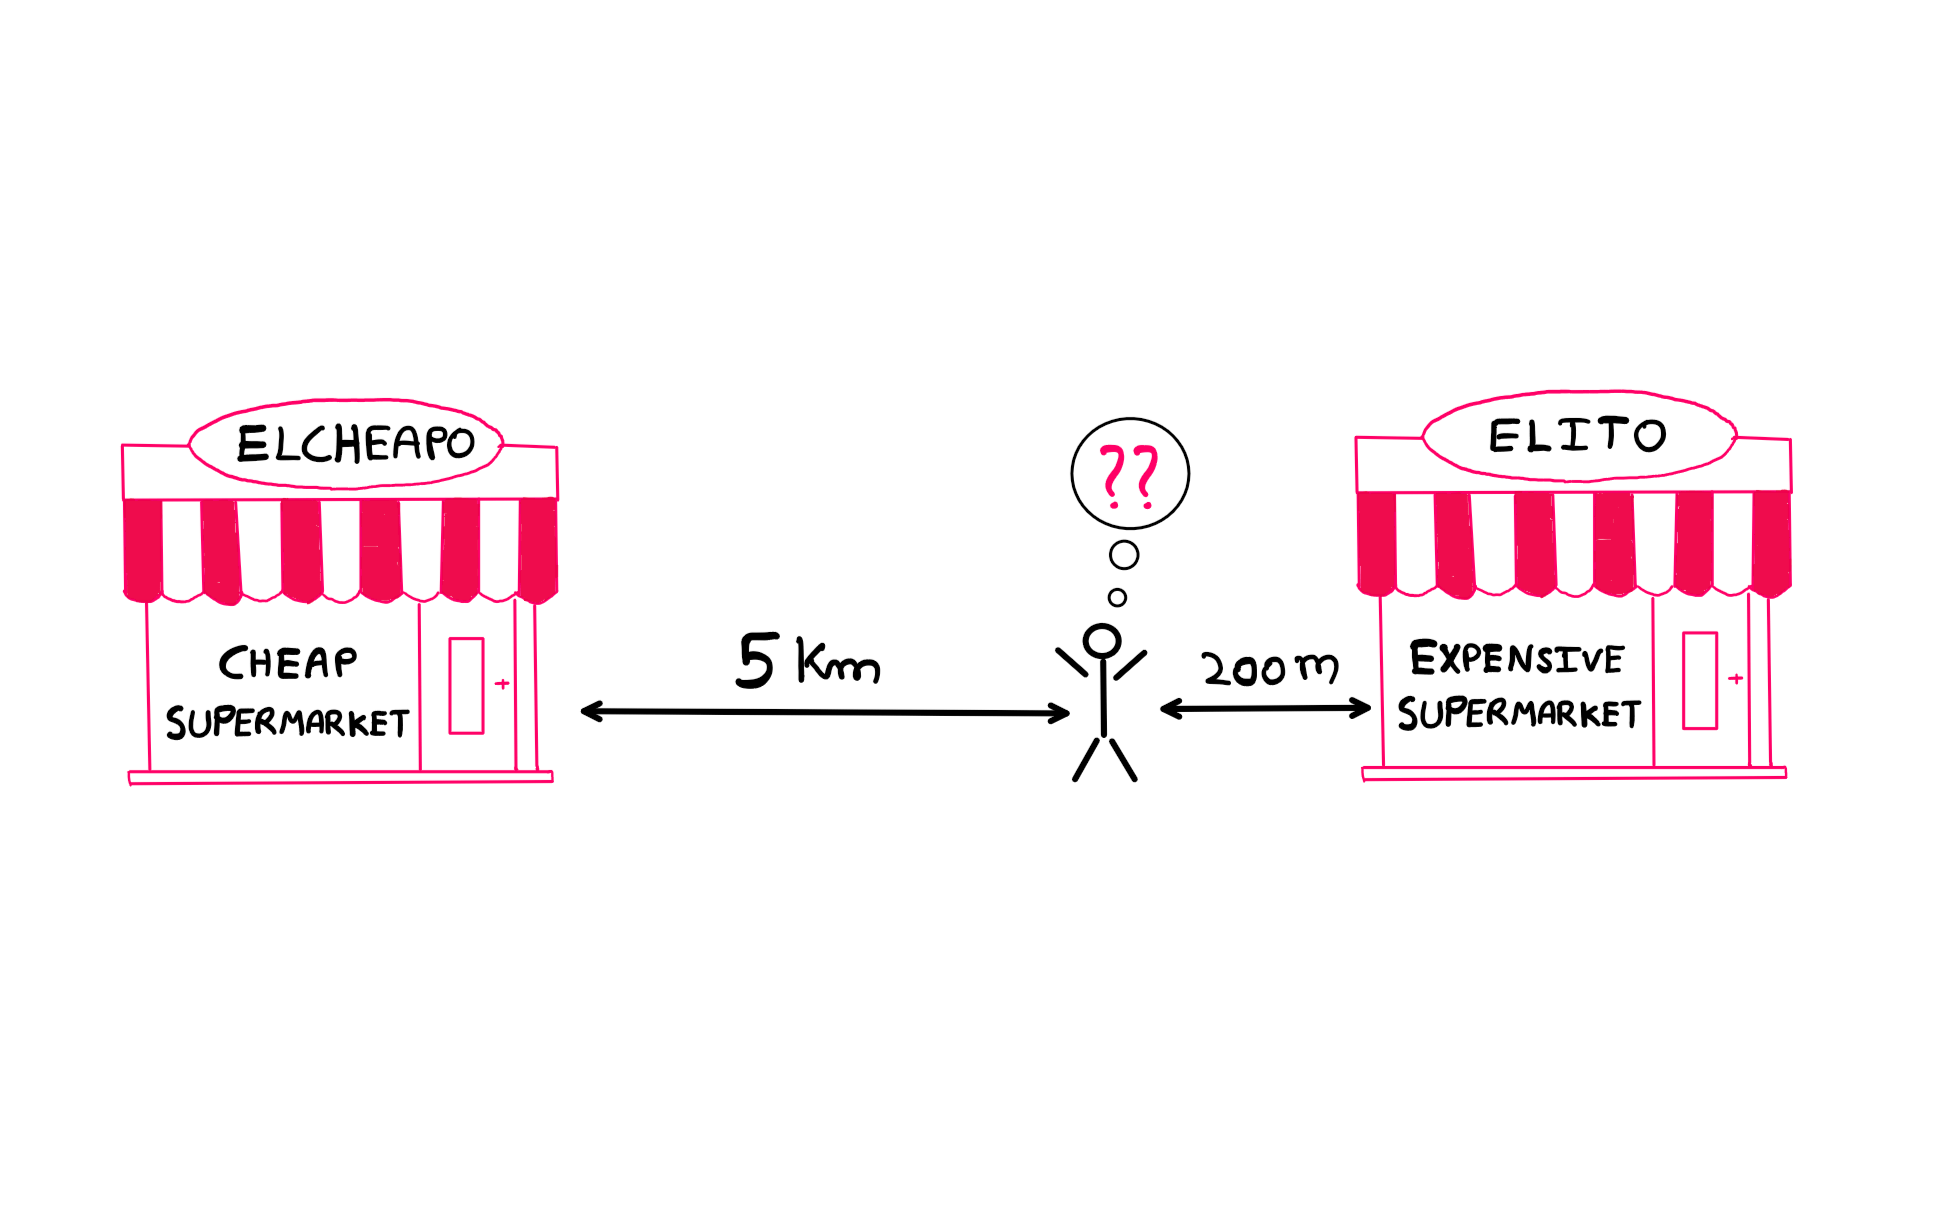 How To Benefit From Computer Science In Real Life (II) - An illustration that shows a cheap supermarket named 'ELCHEAPO' on the left and an expensive supermarket named 'ELITO' on the right. Somewhere in between the supermarkets is a stick figure that is struggling to decide. 'ELCHEAPO' is 5 kilometres away from the stick figure, whereas 'ELITO' is just 200 metres away.